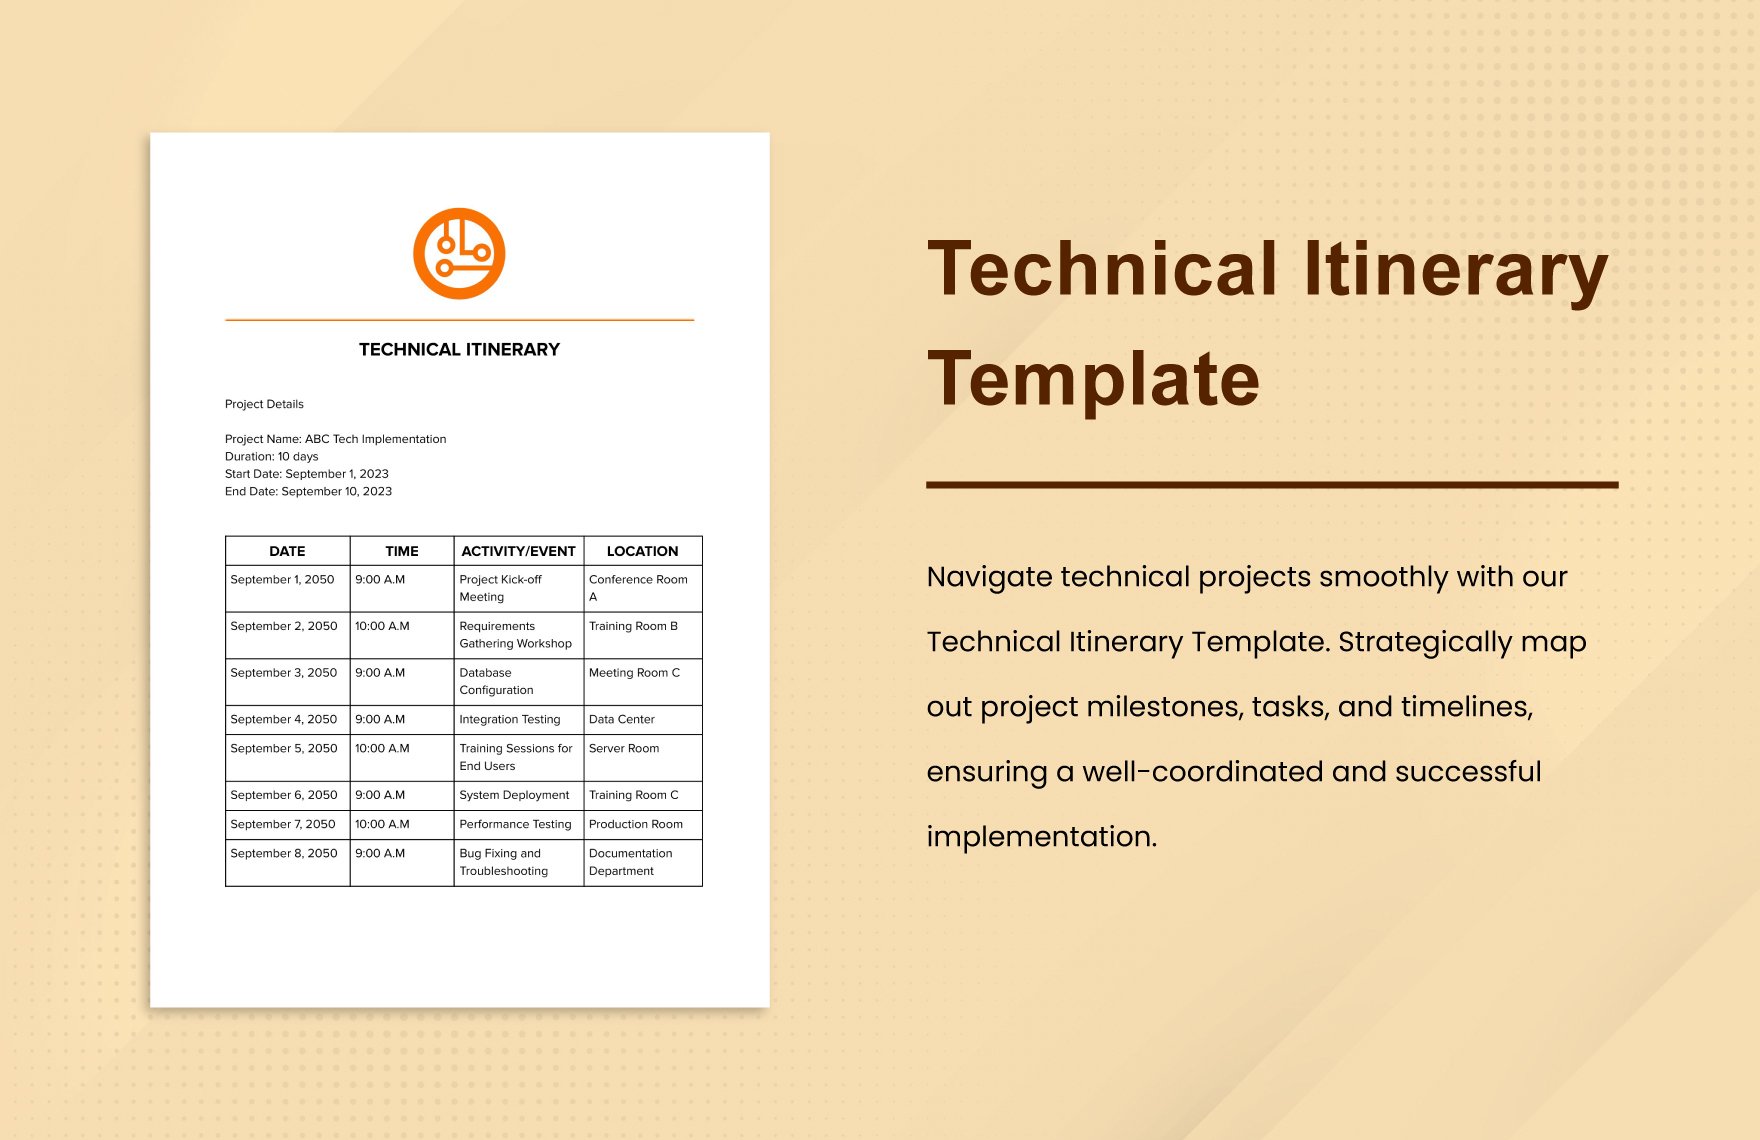 Technical Itinerary Template